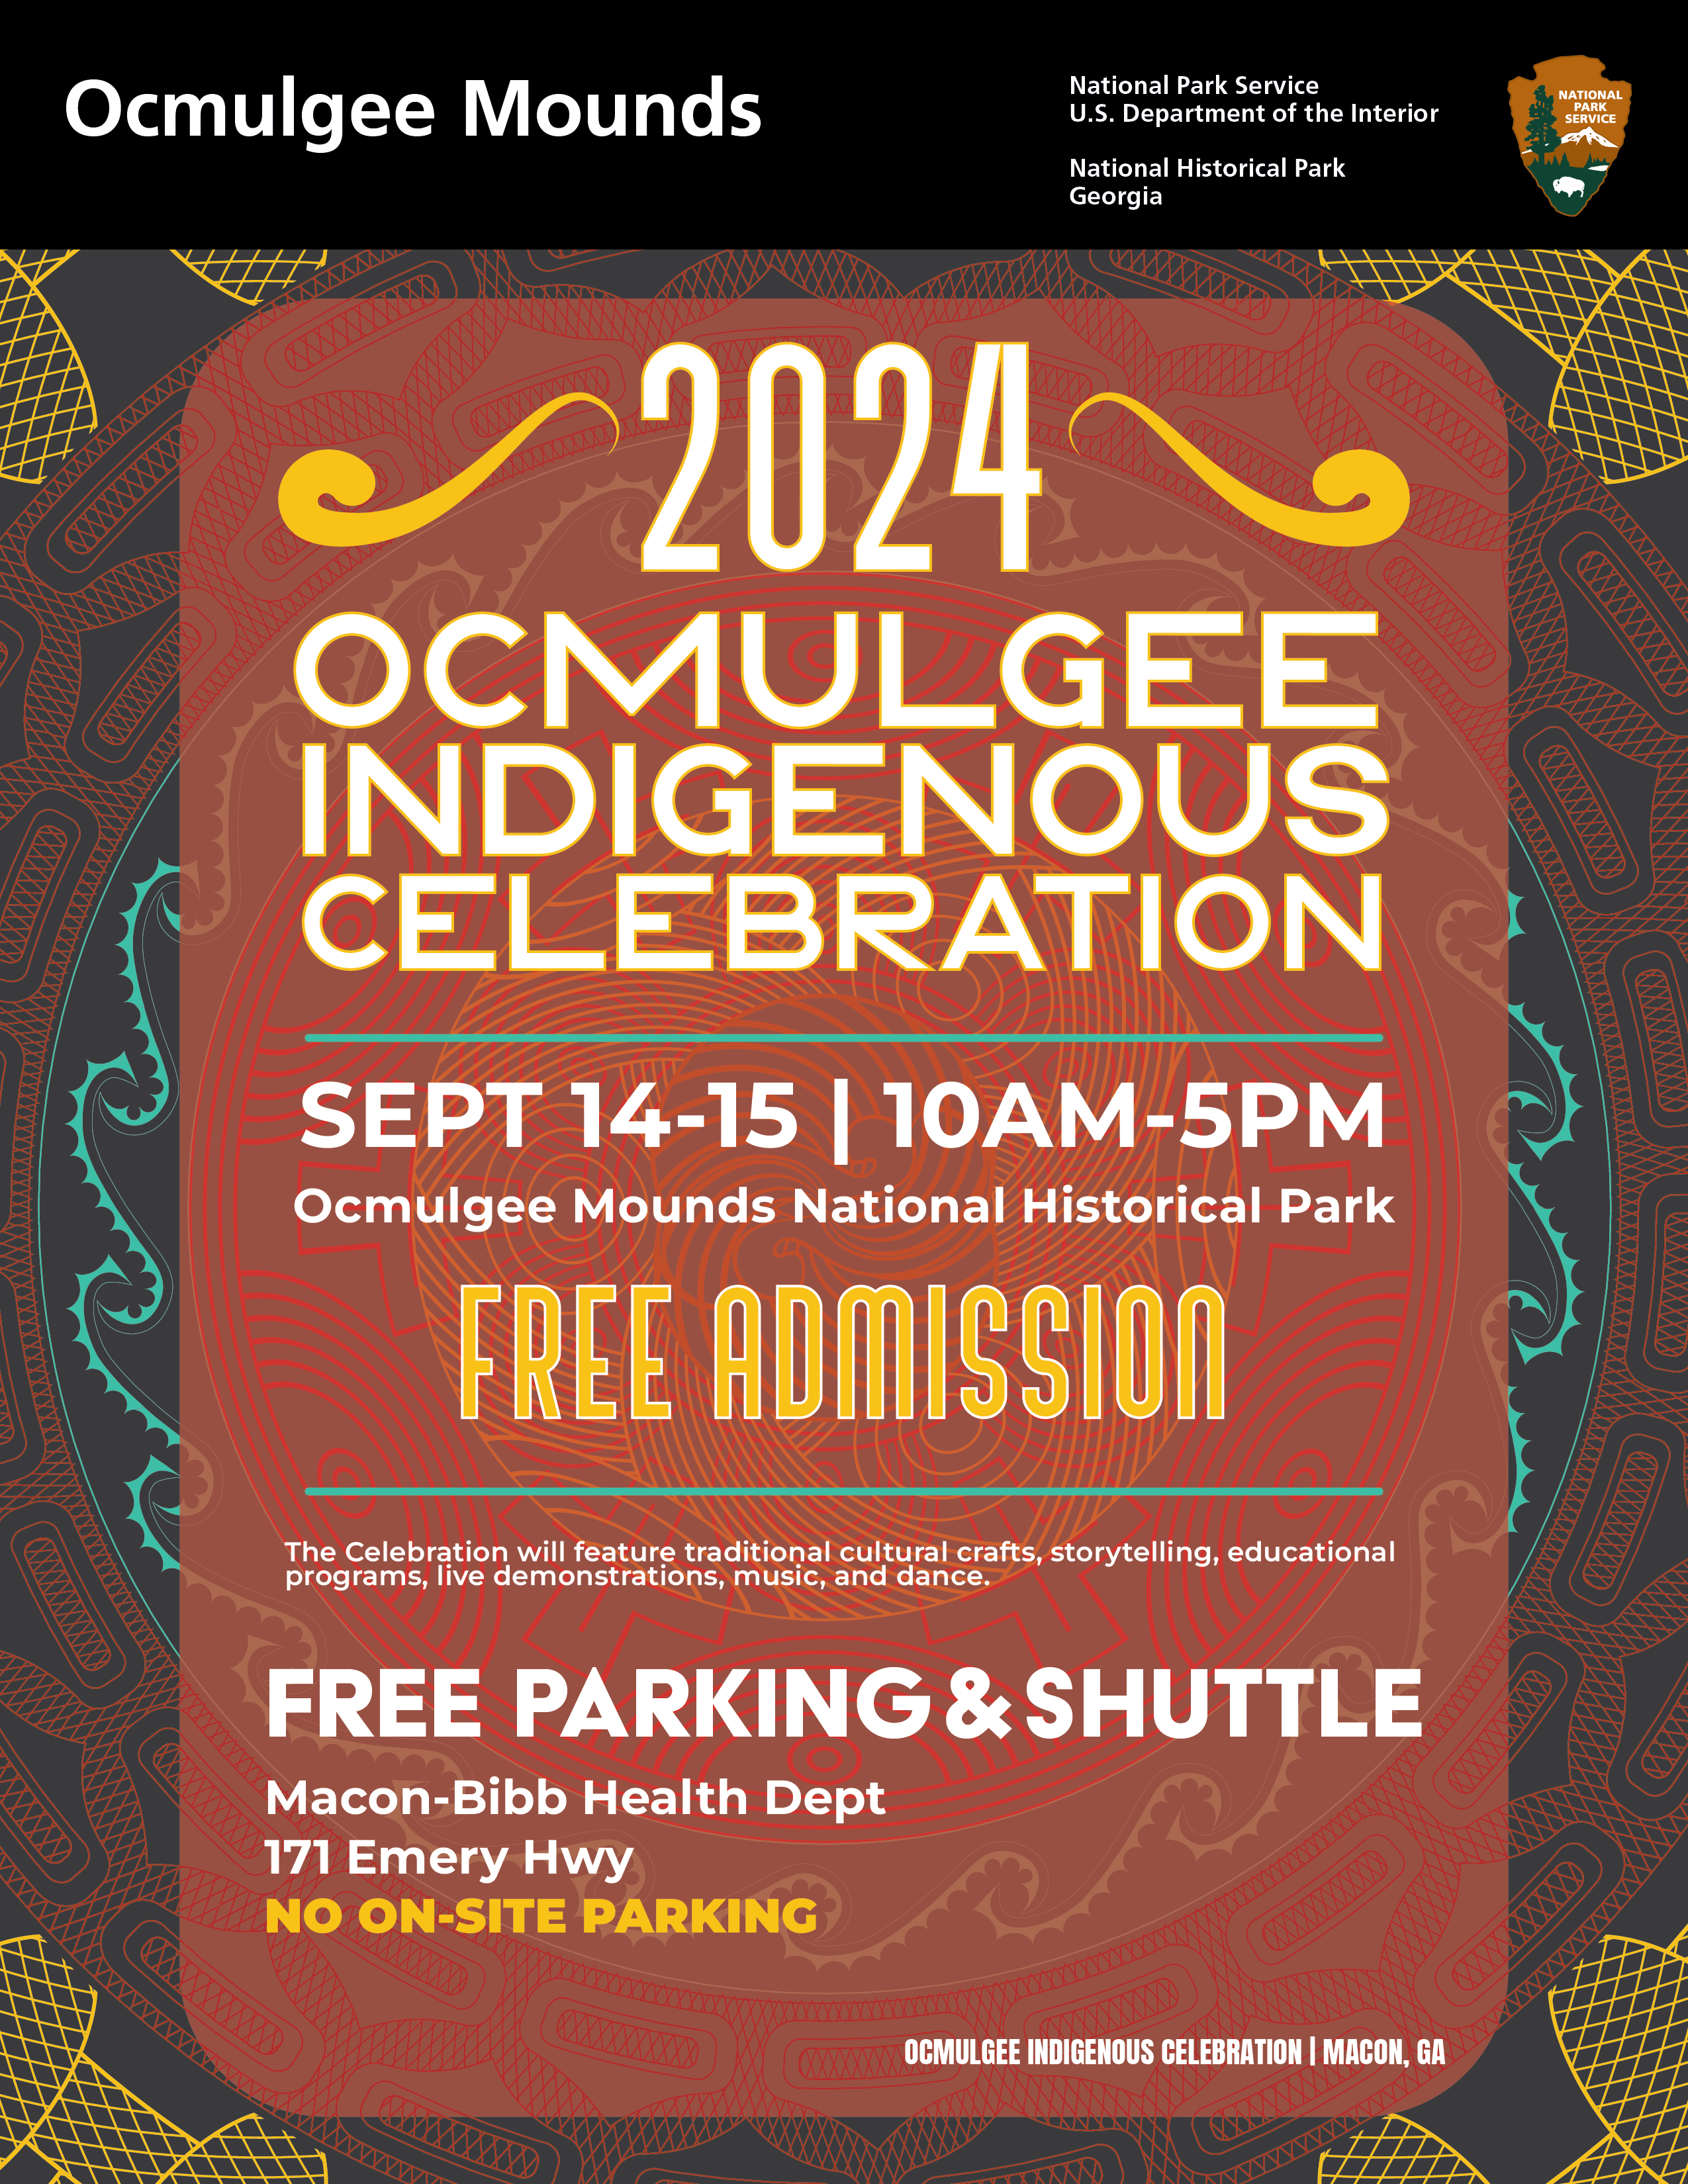 2024 Ocmulgee Indigenous Celebration sept 14-15 10 A M to 5 P M Ocmulgee mounds national historical park free admission free parking and shuttle macon-bibb health dept 171 Emery HWY no on site parking